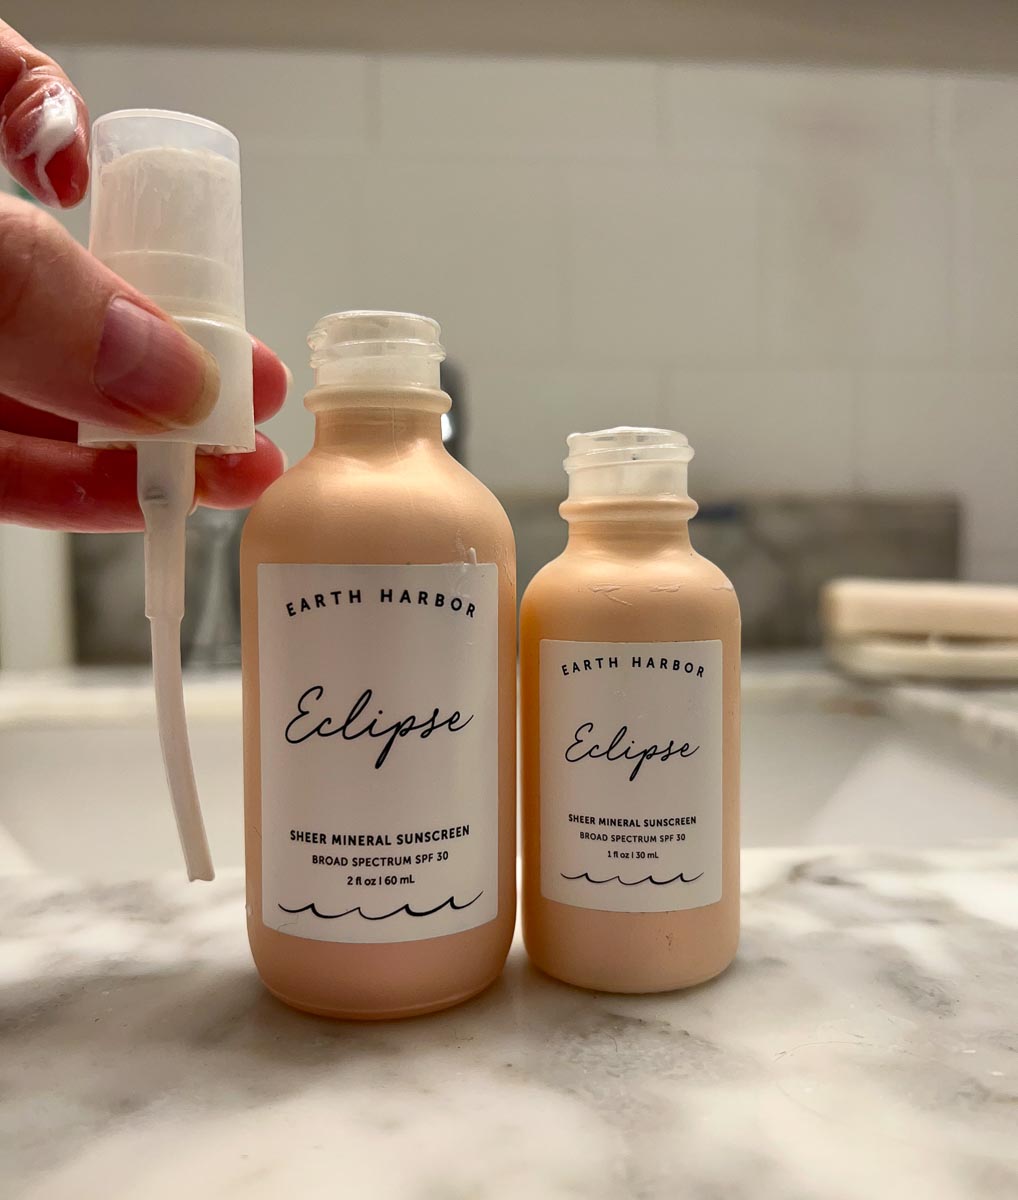 Earth Harbor's new refillable glass bottles for skincare, with reusable pumps – a larger refill bottle next to a small bottle, showing that the pump tube is not long enough to use on the larger bottle. ©KettiWilhelm2022